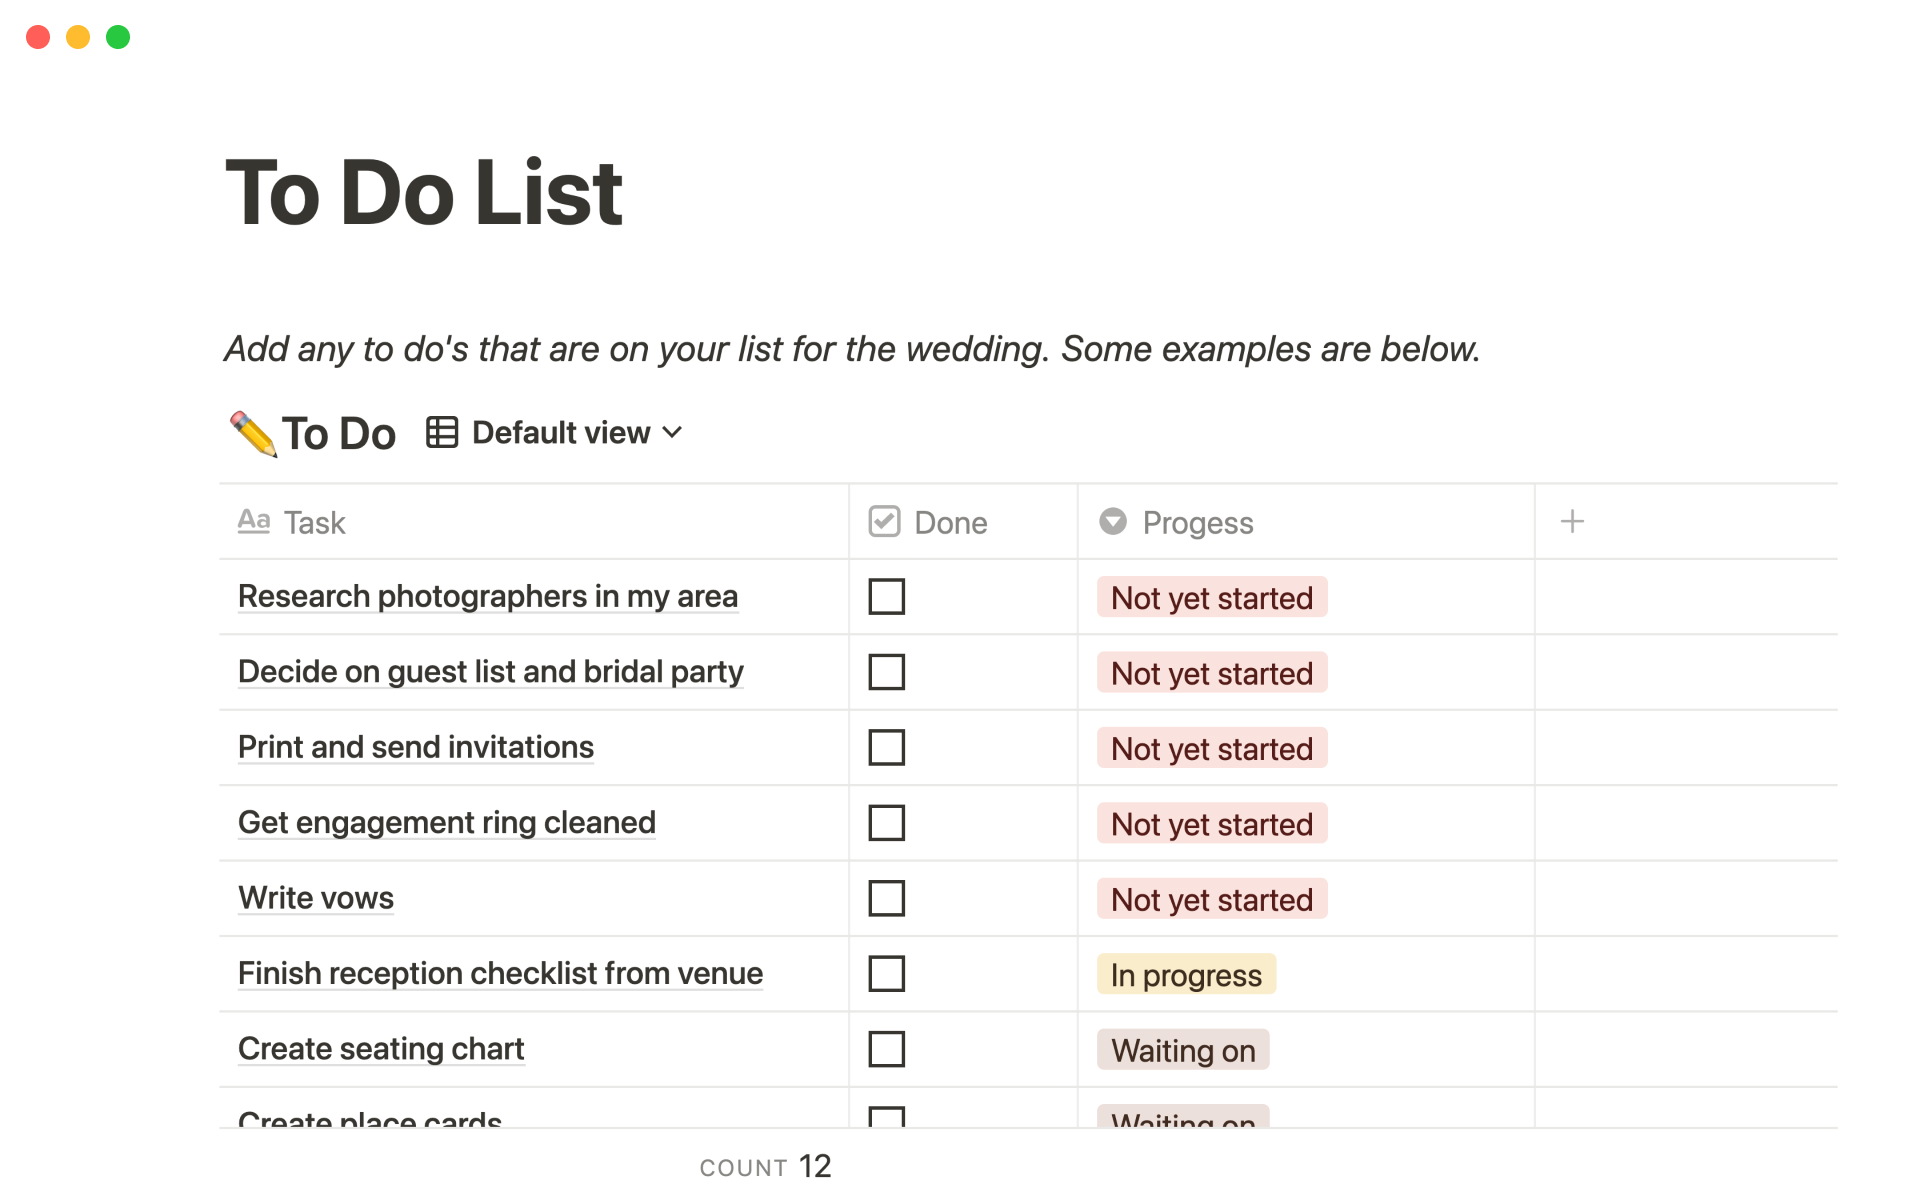 Plan your entire wedding in one place.